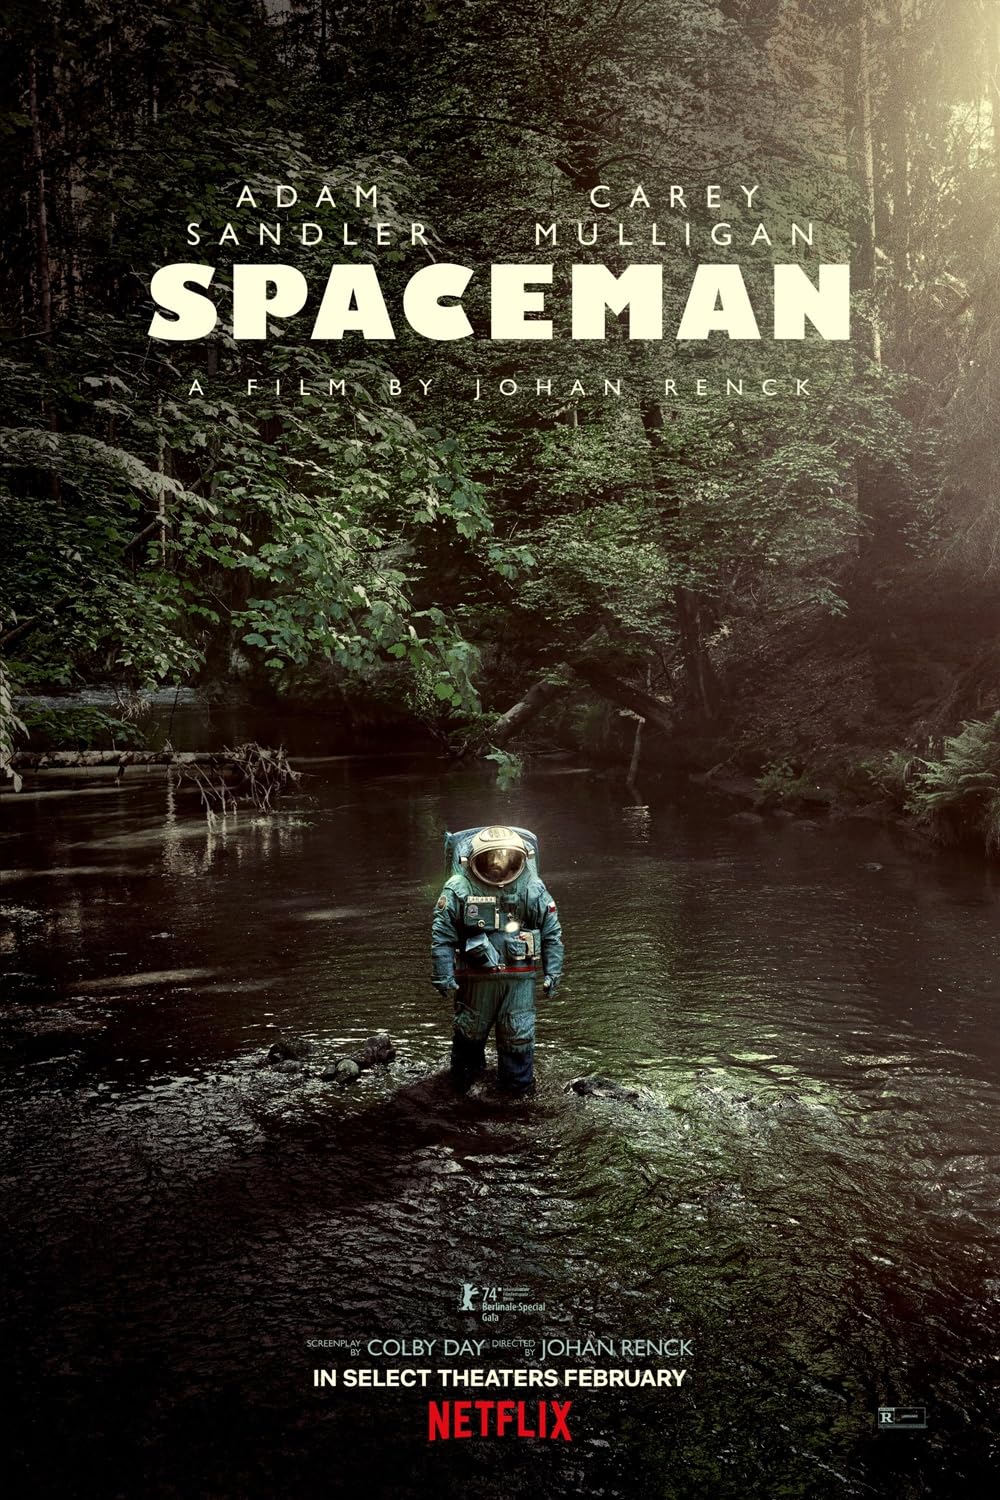 Spaceman movie review on Mother of Movies